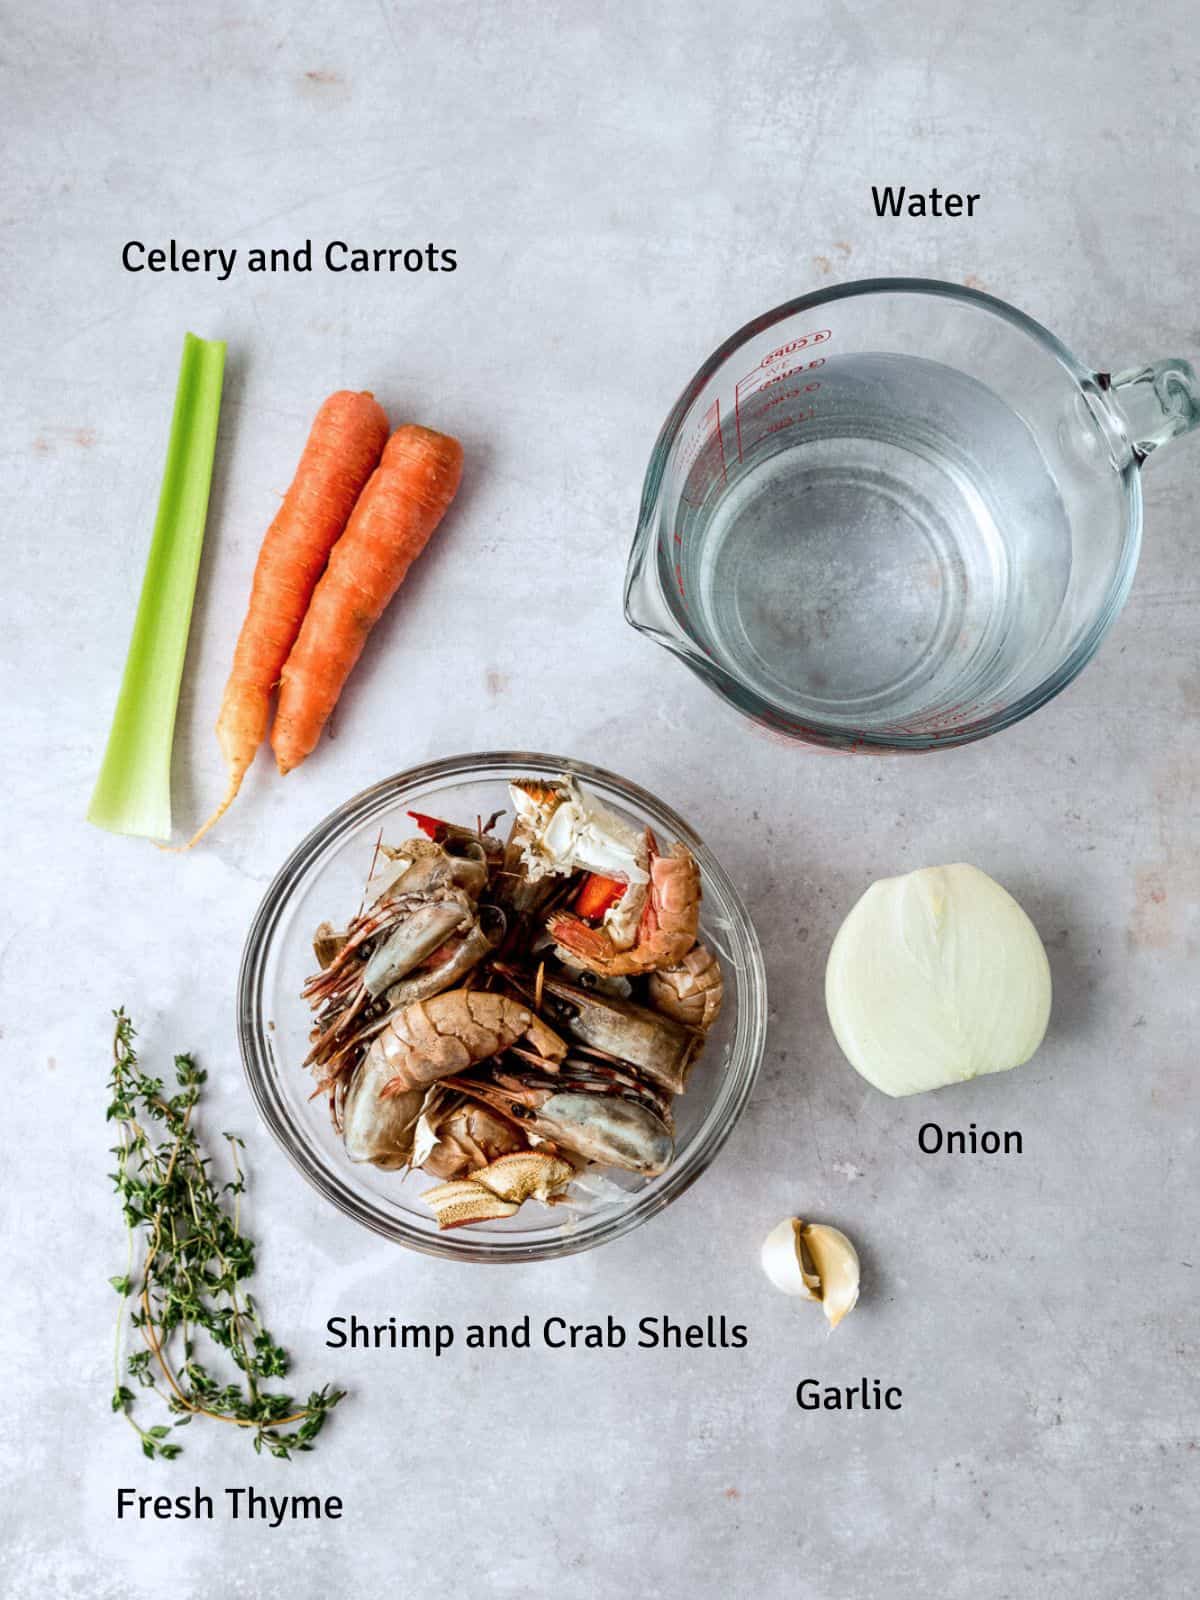 Ingredients for seafood stock, including shrimp shells, carrots, garlic and fresh herbs.